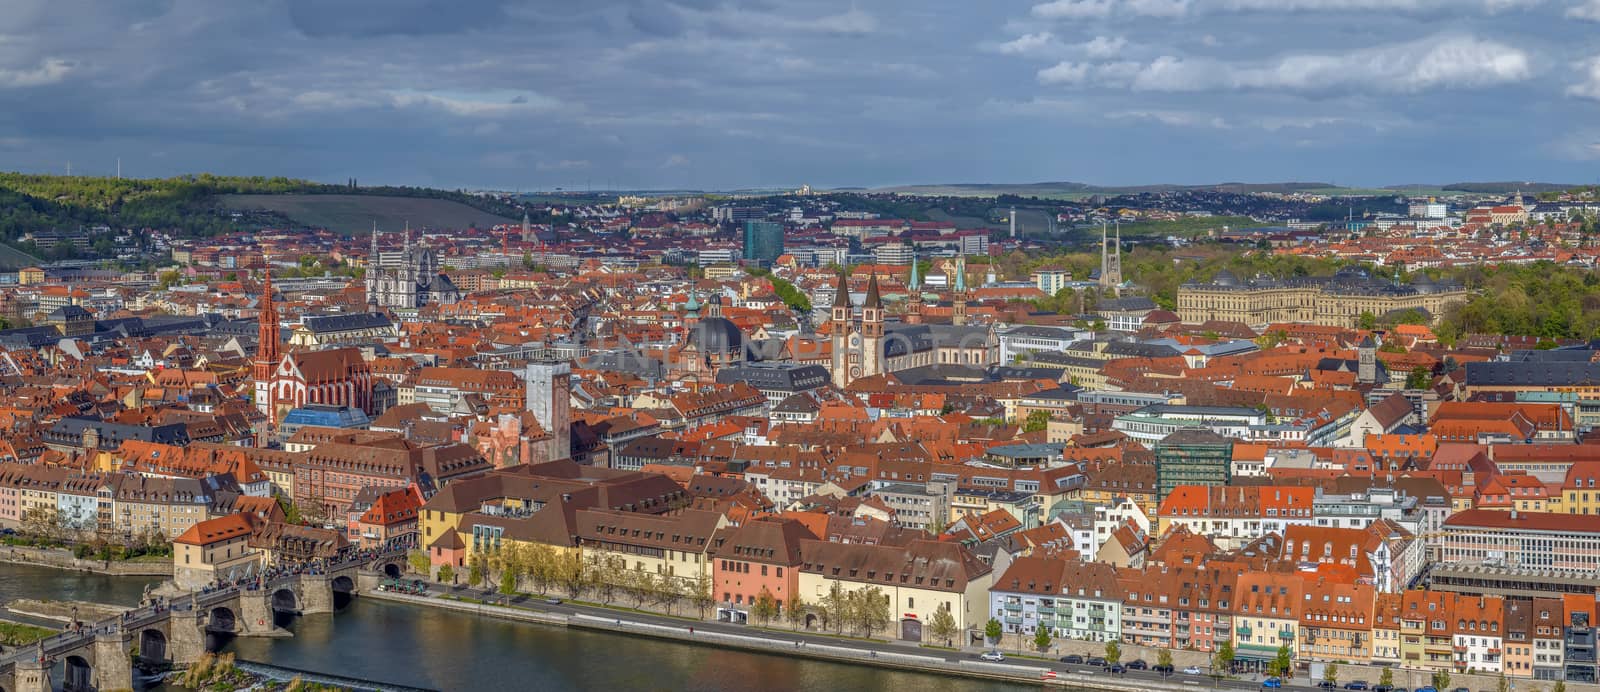 Panoramic view of  historical center of Wurzburg  from Marienberg Fortress, Germany